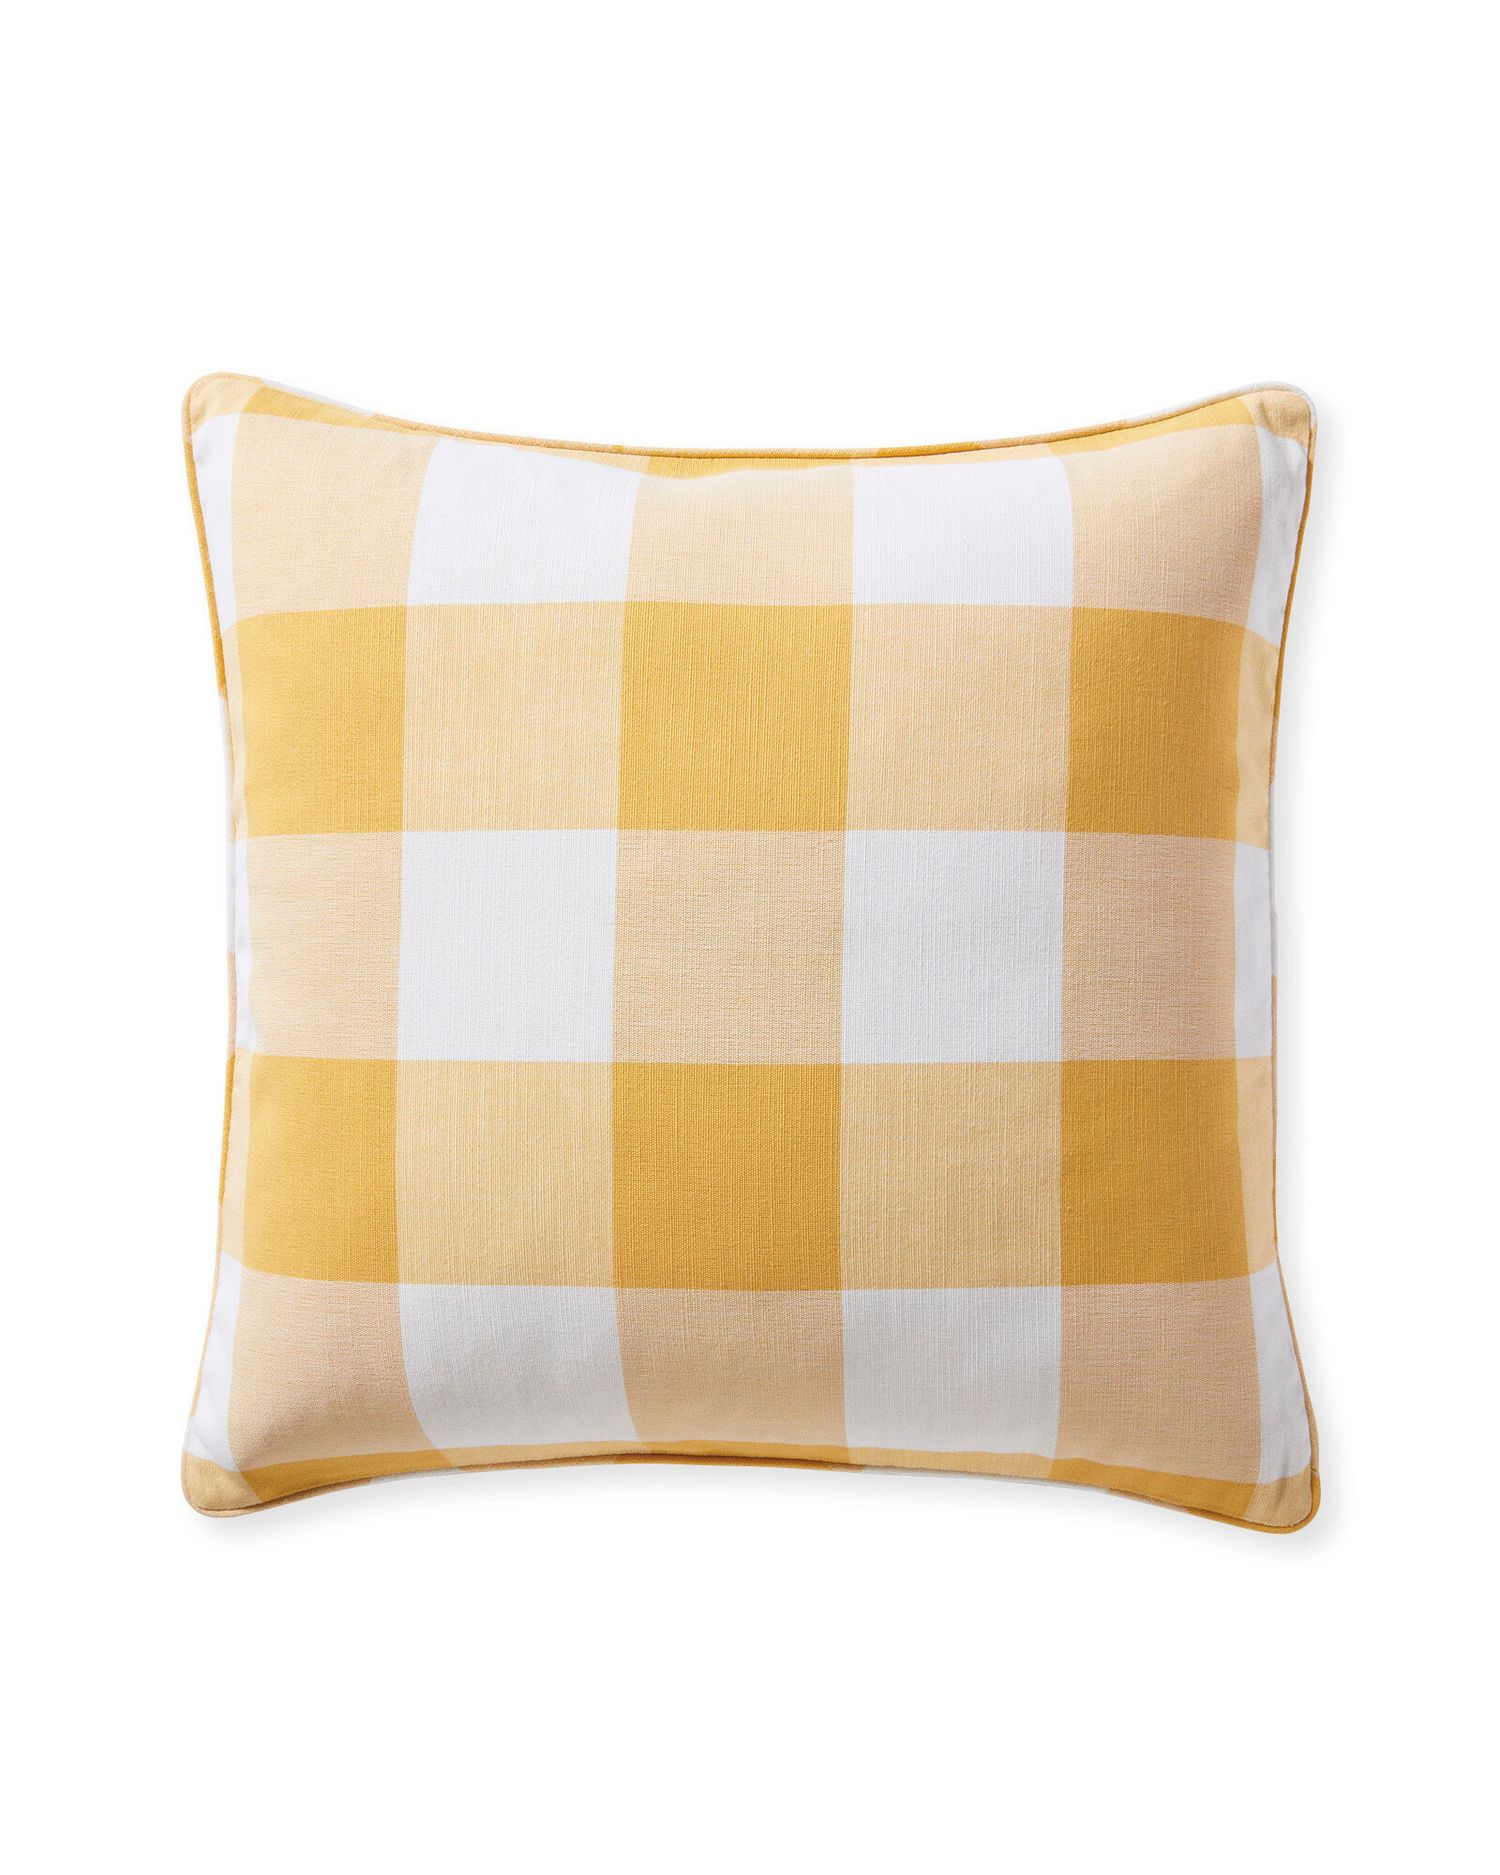 Shop Perennials Gingham Pillow Cover (sunflower)  from Serena & Lily on Openhaus